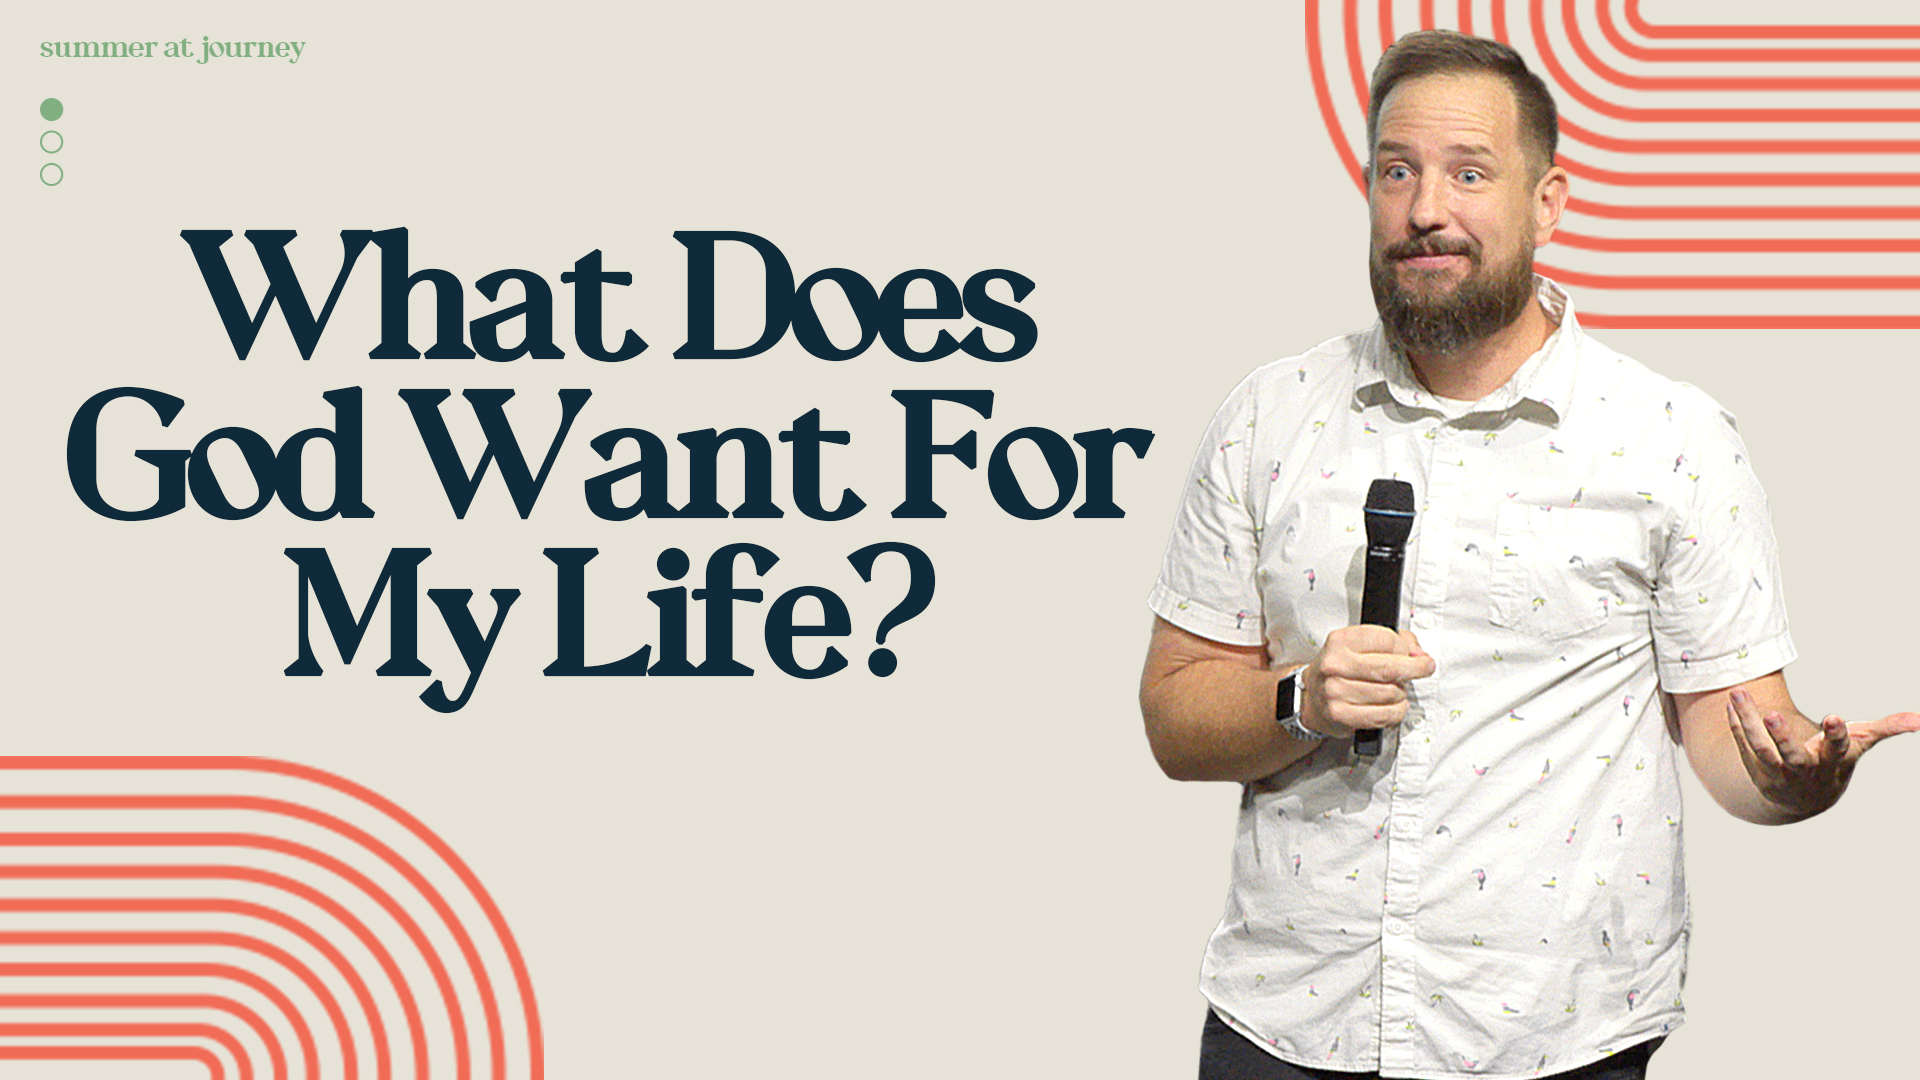 What Does God Want For My Life?